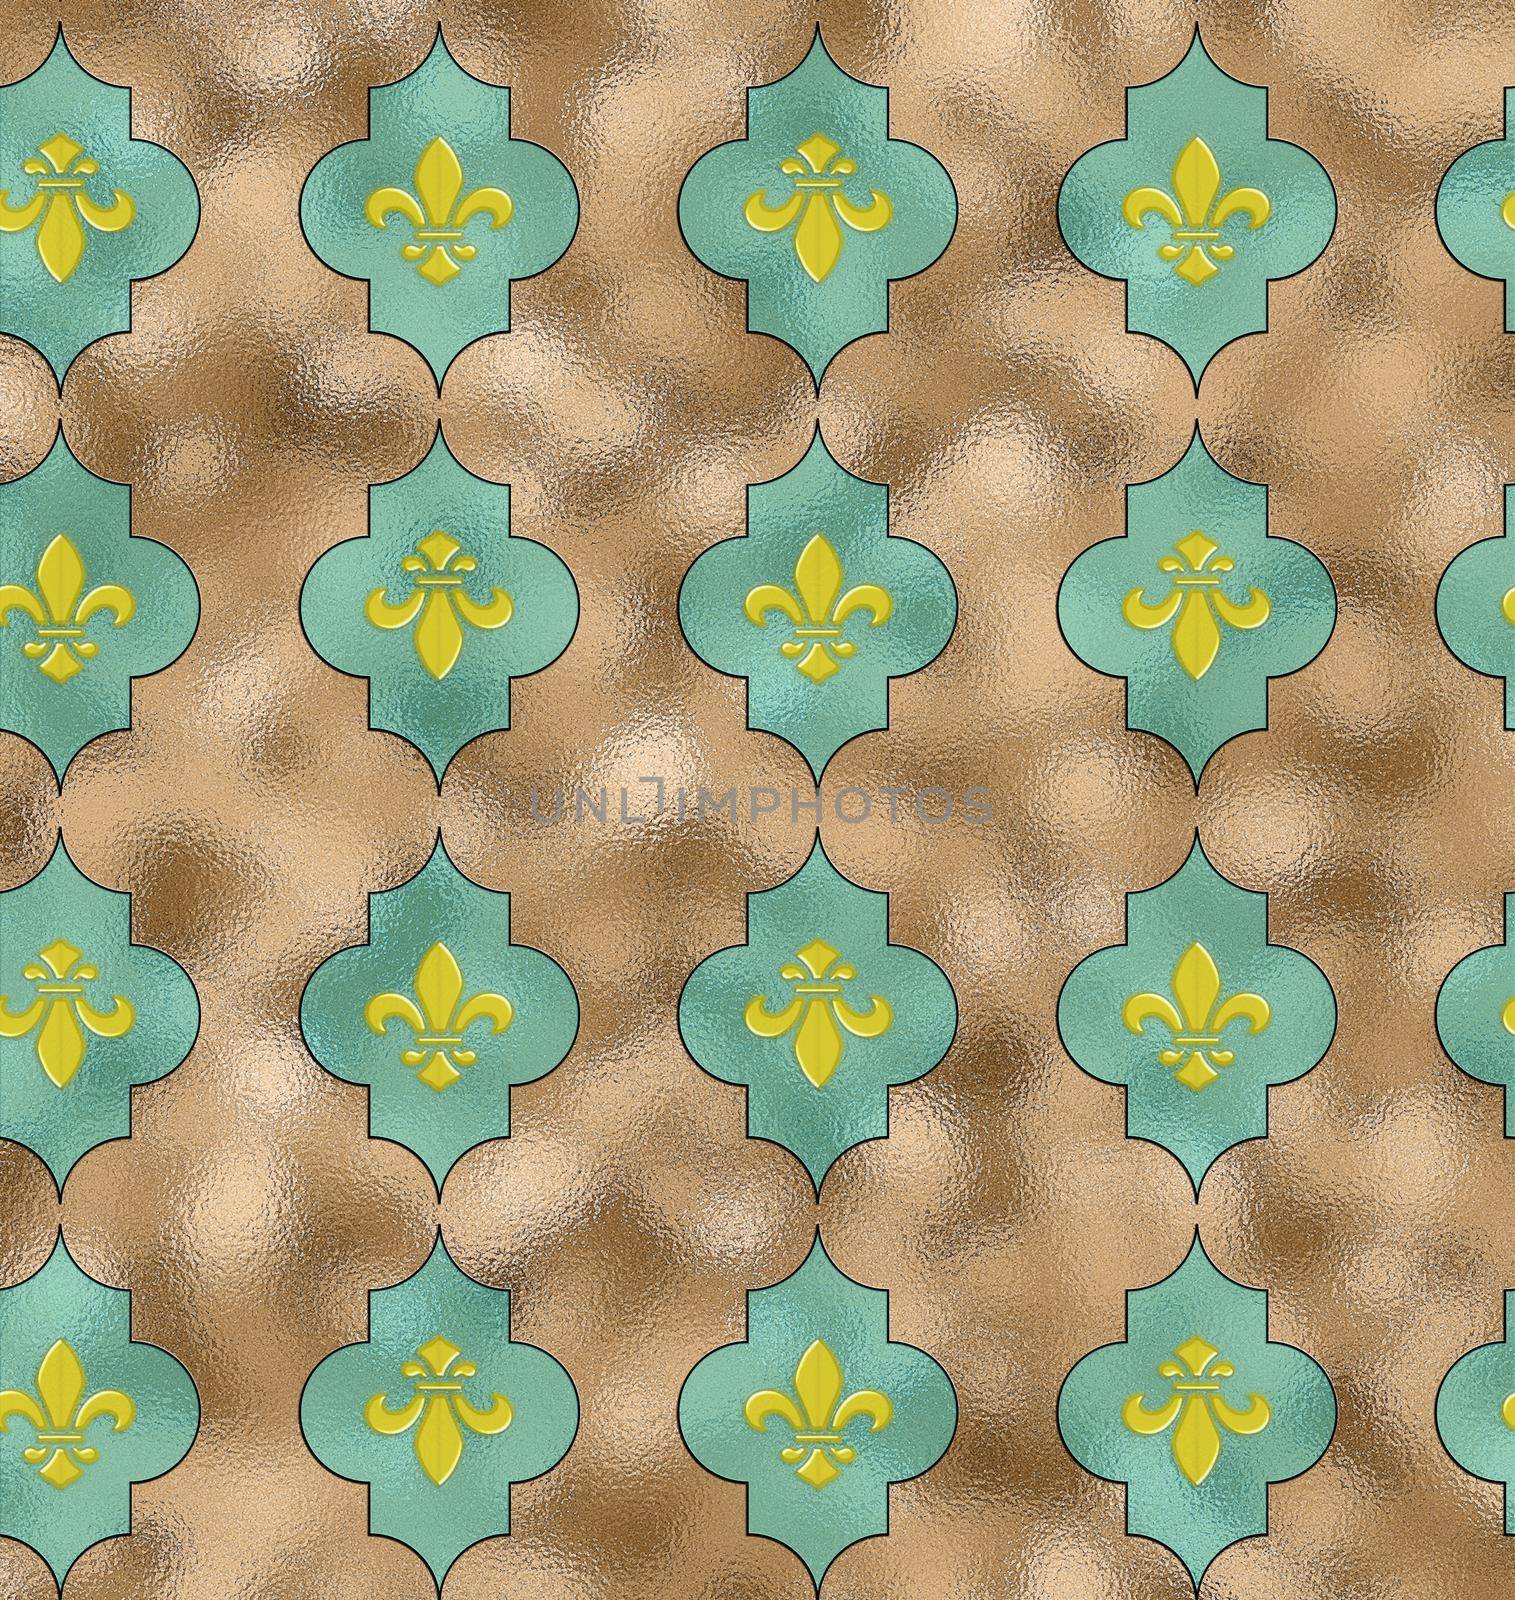 Royal Lily Fleur de Lis Seamless Pattern. Turquoise blue seamless background with lily fleur de lis for print fabric or poster. 3Dillustration